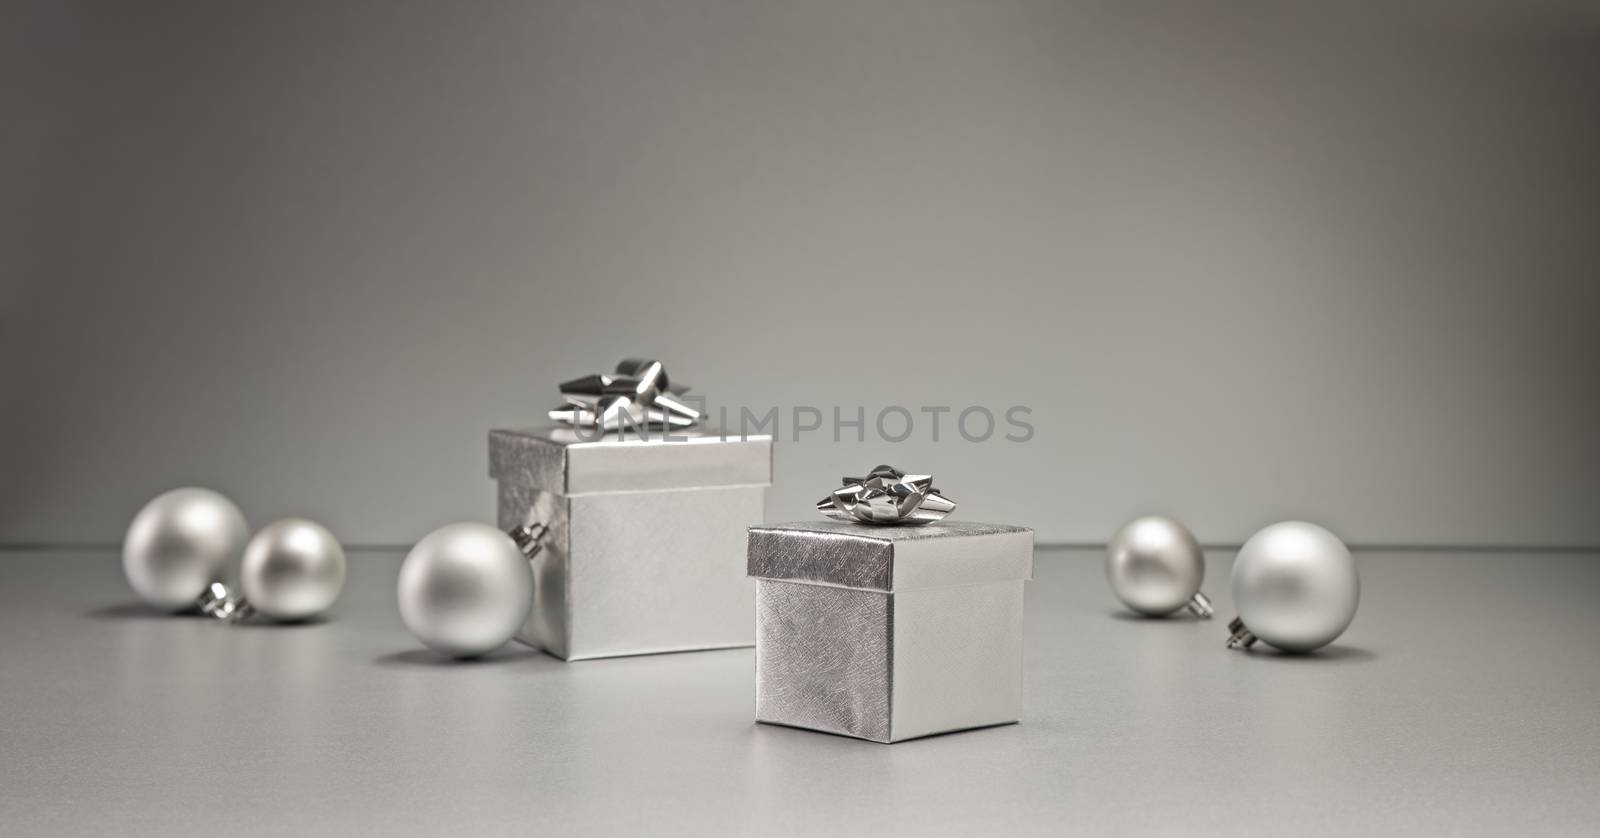 Silver bauble and present in Christmas setting